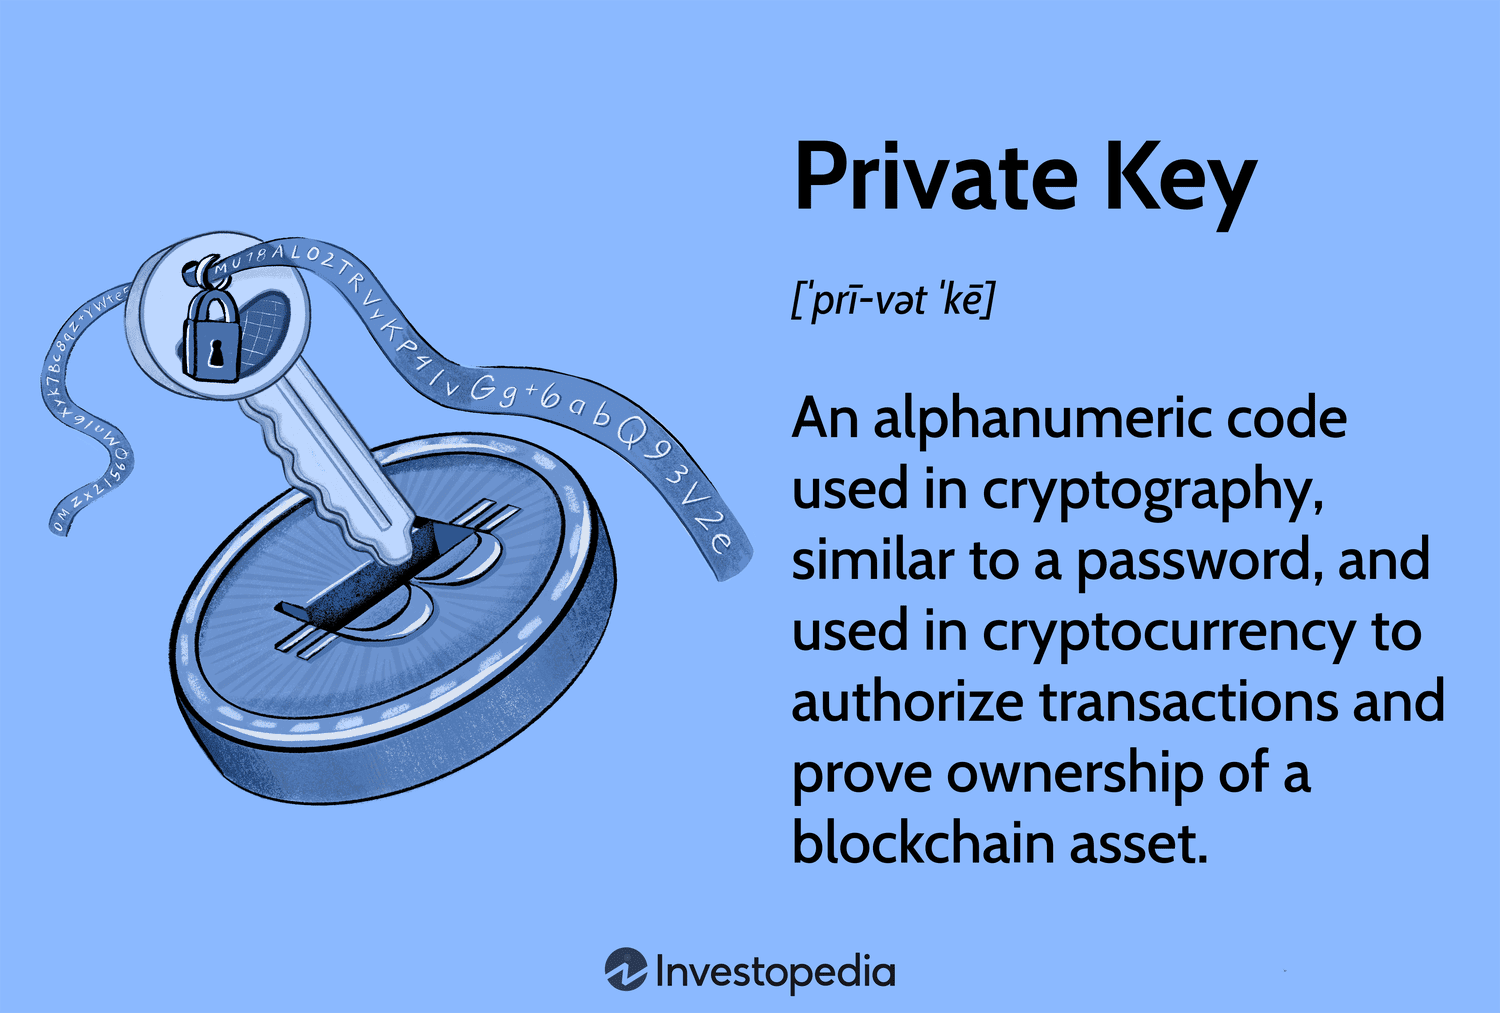 Classification of Cryptographic Keys